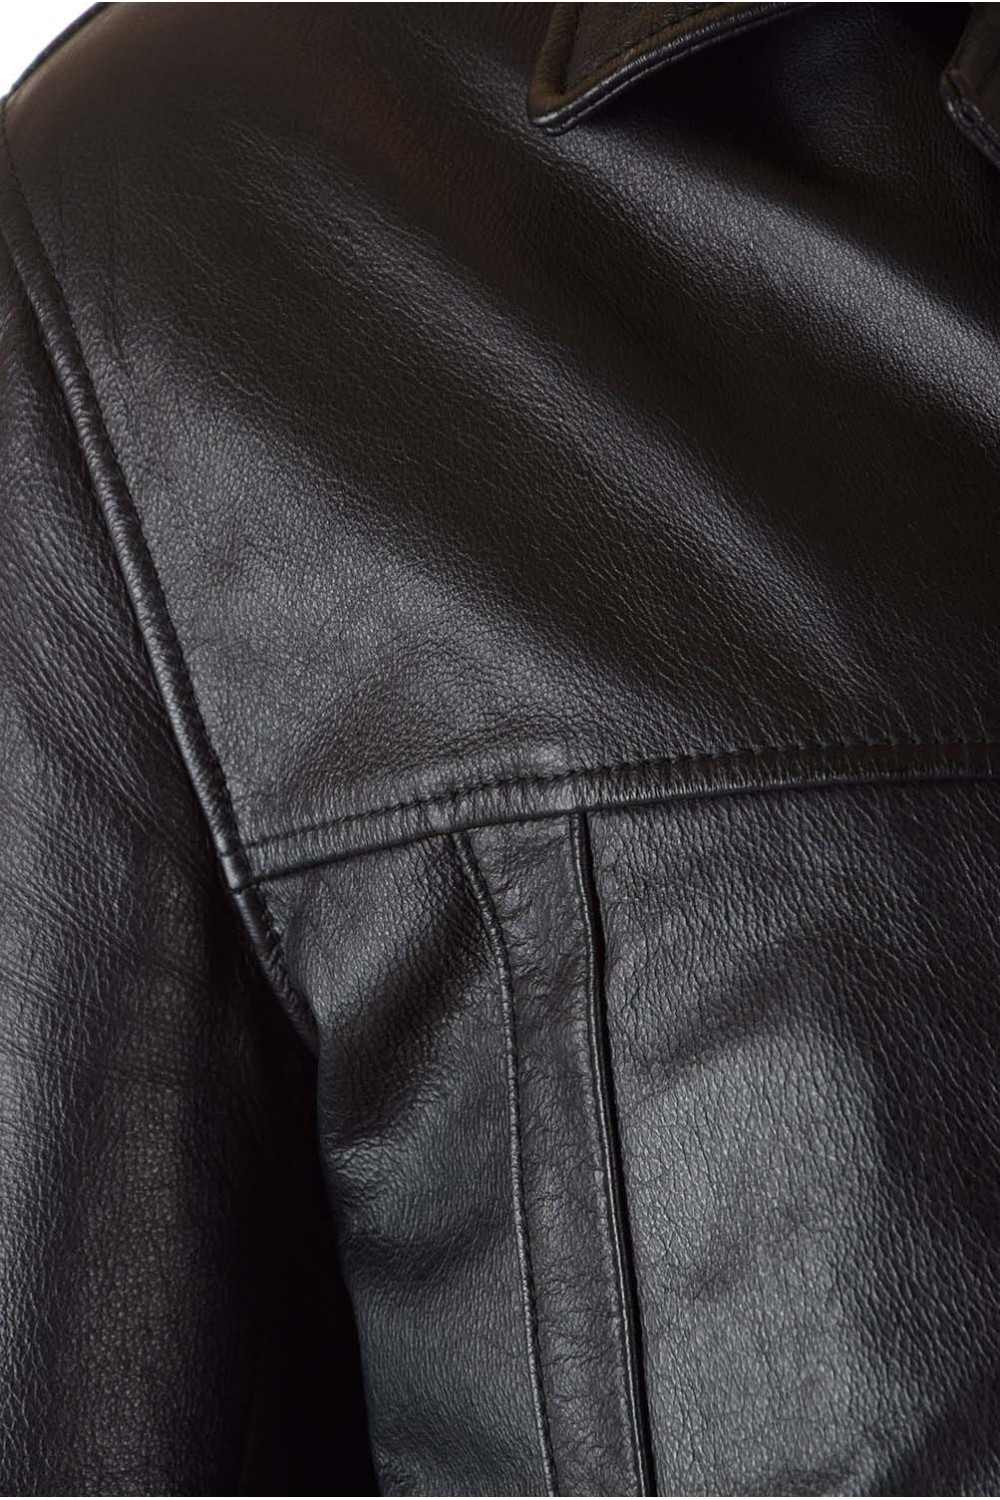 Excellent leather jacket for men | furlando - leather and fur.